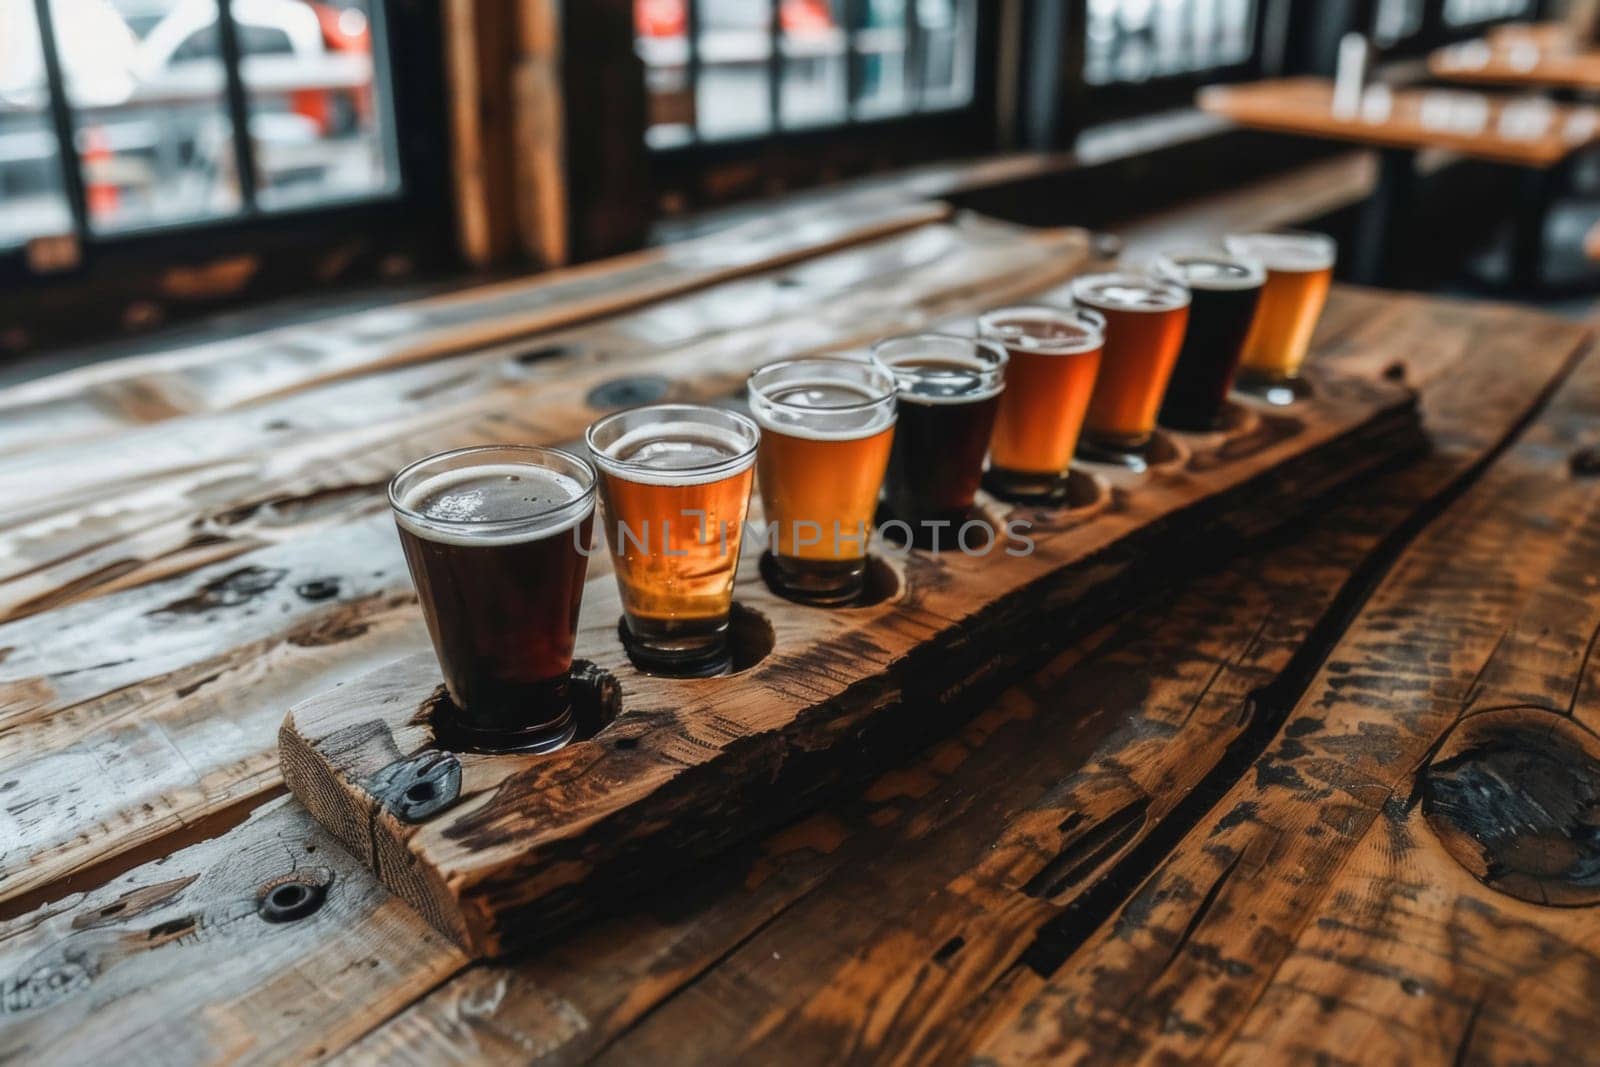 A craft beer flight perfectly aligned on a bespoke wooden paddle, inviting a journey through unique brew tastes and aromas.